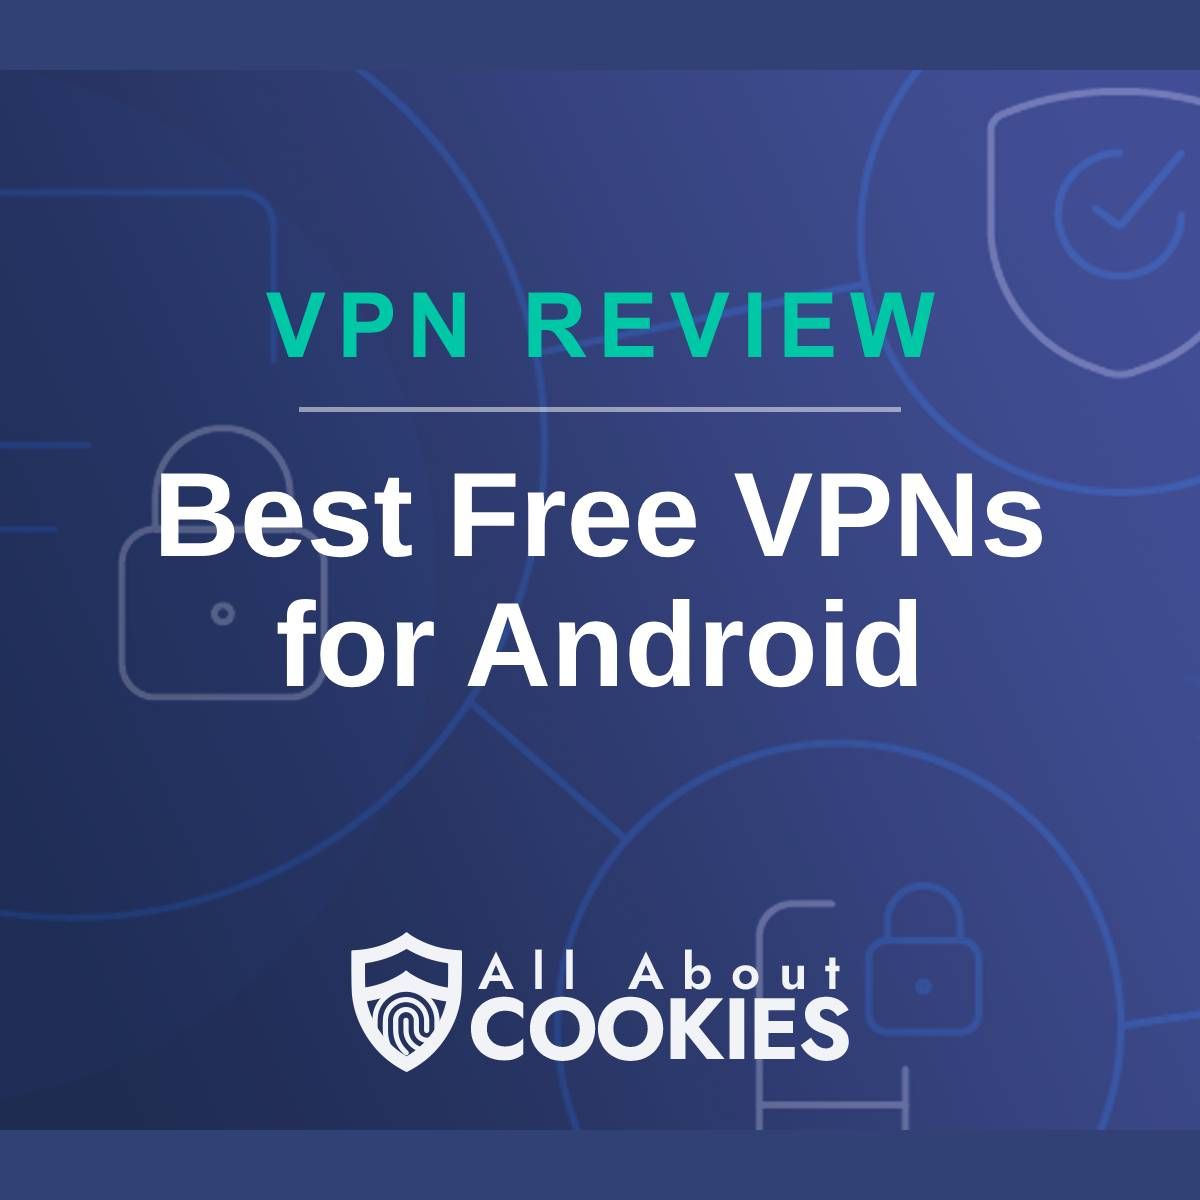 A blue background with images of locks and shields with the text &quot;Best Free VPNs for Android&quot; and the All About Cookies logo. 